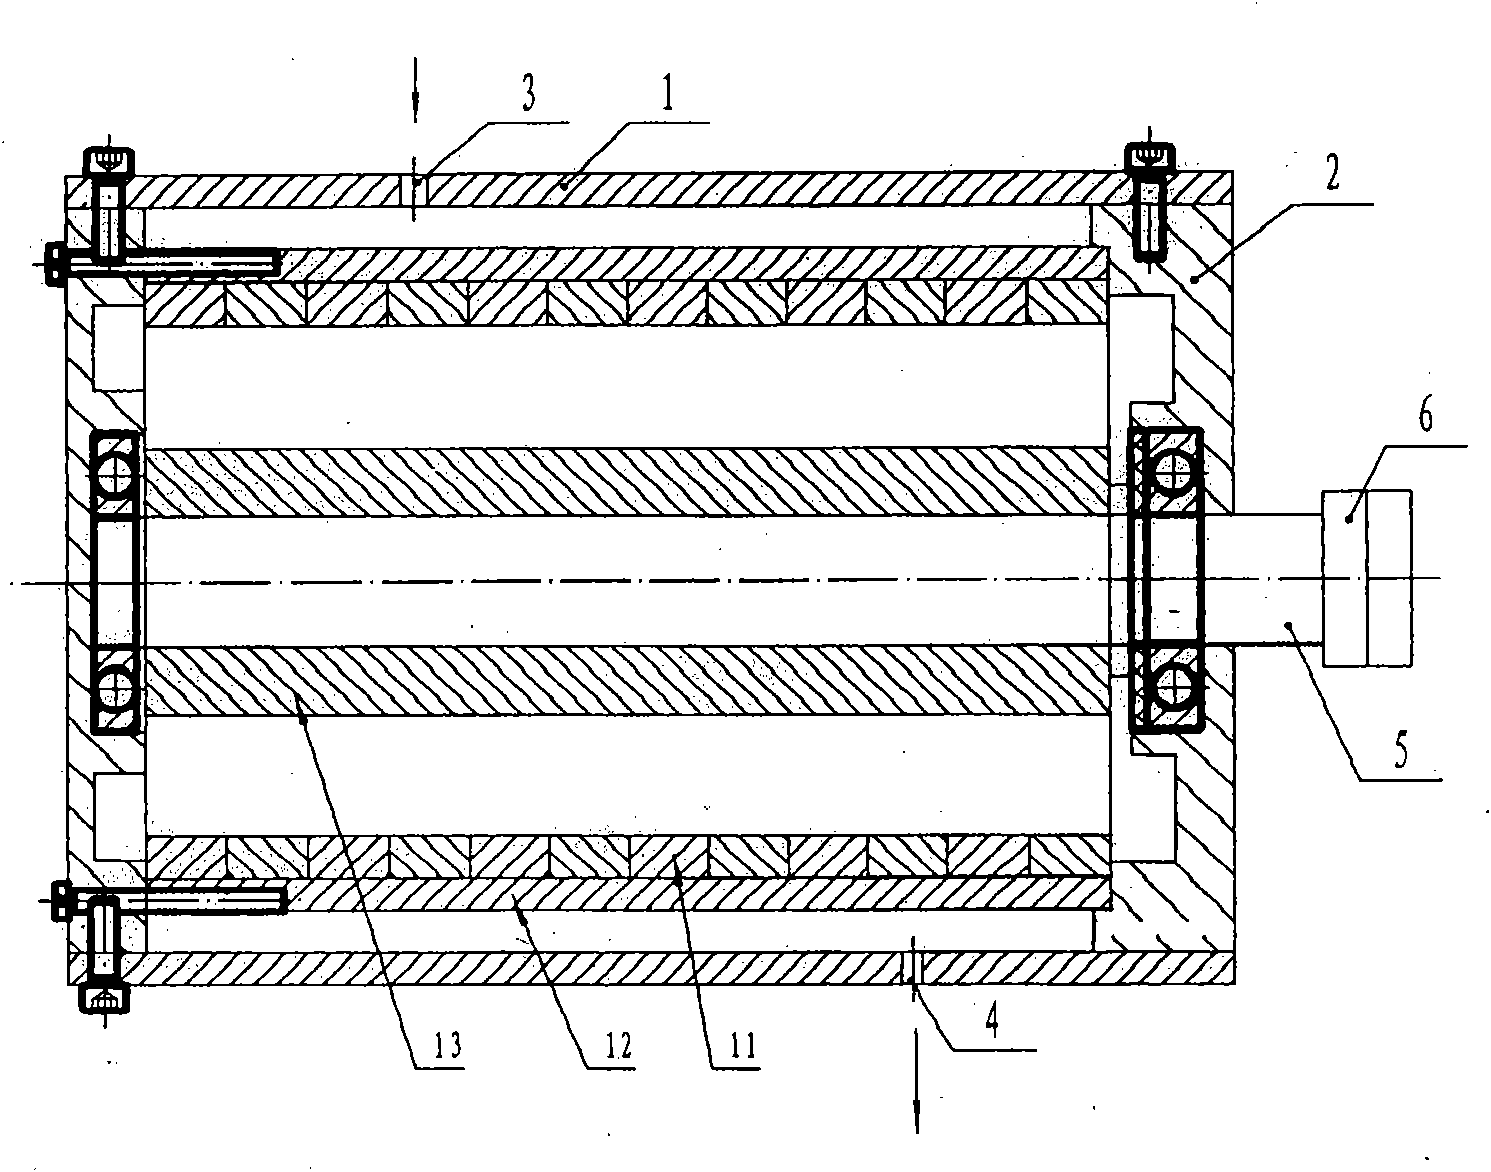 Magnetic induction heating method and special devices